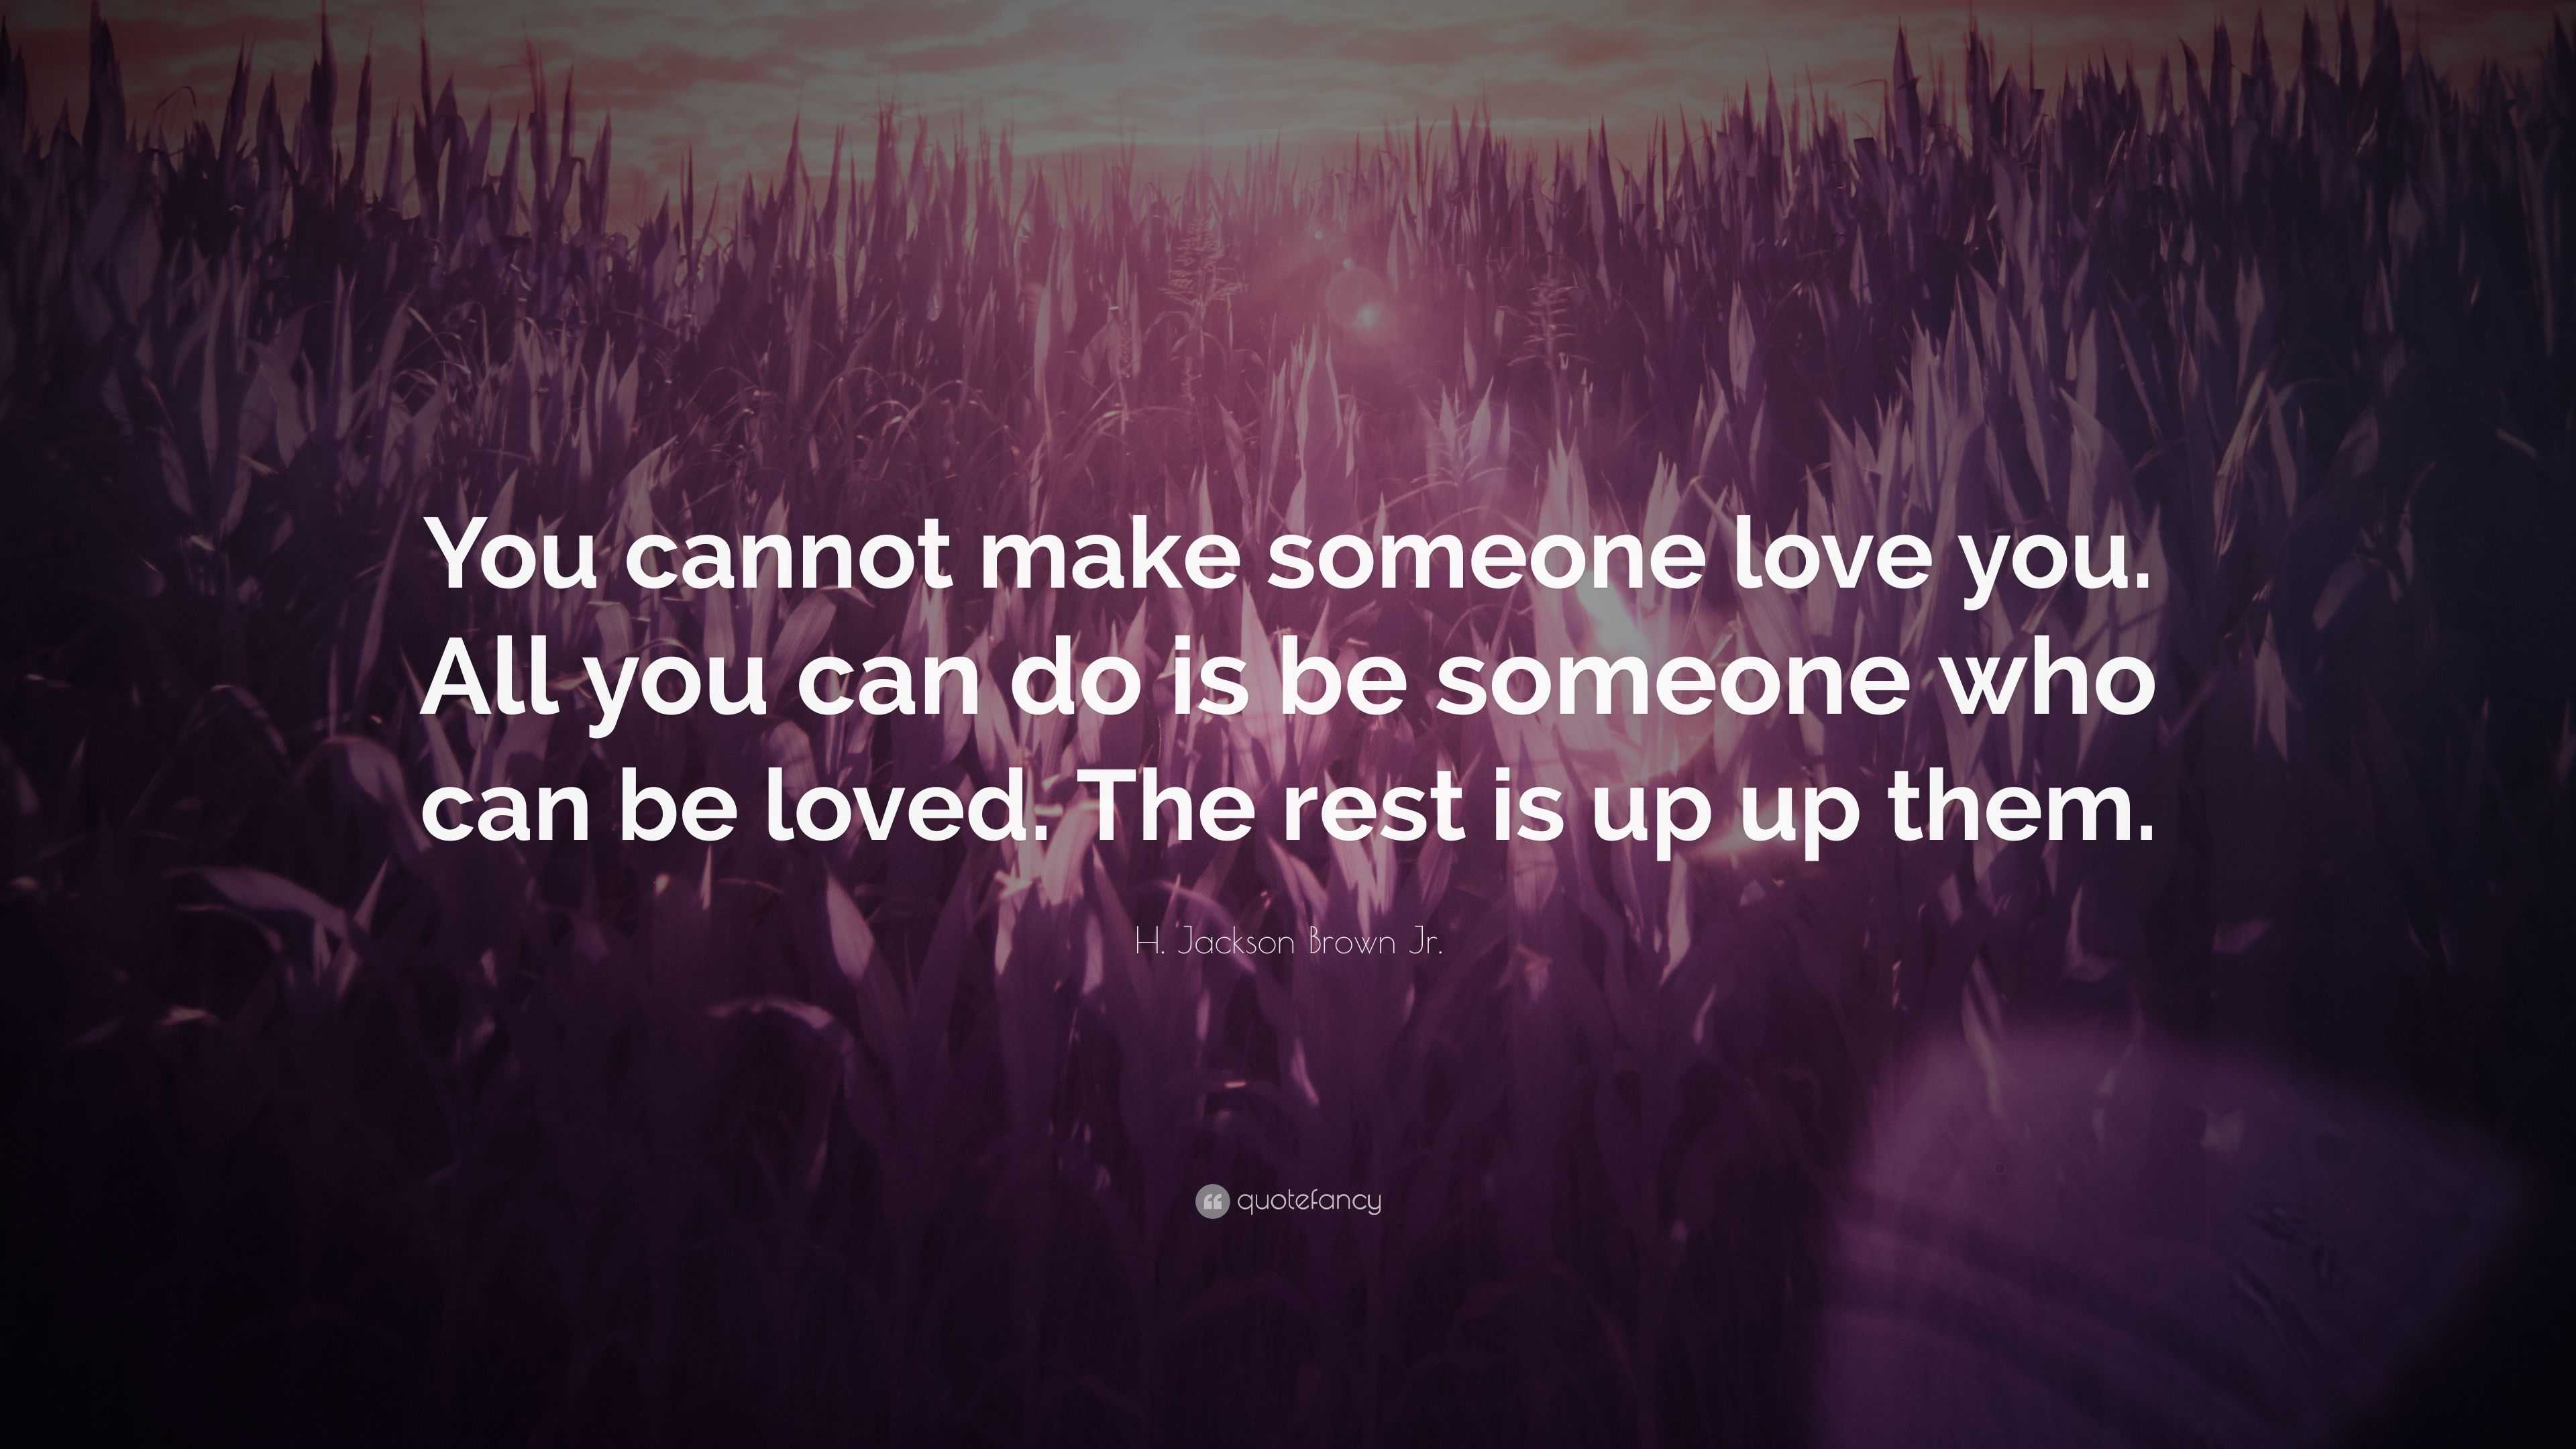 H Jackson Brown Jr Quote “You cannot make someone love you